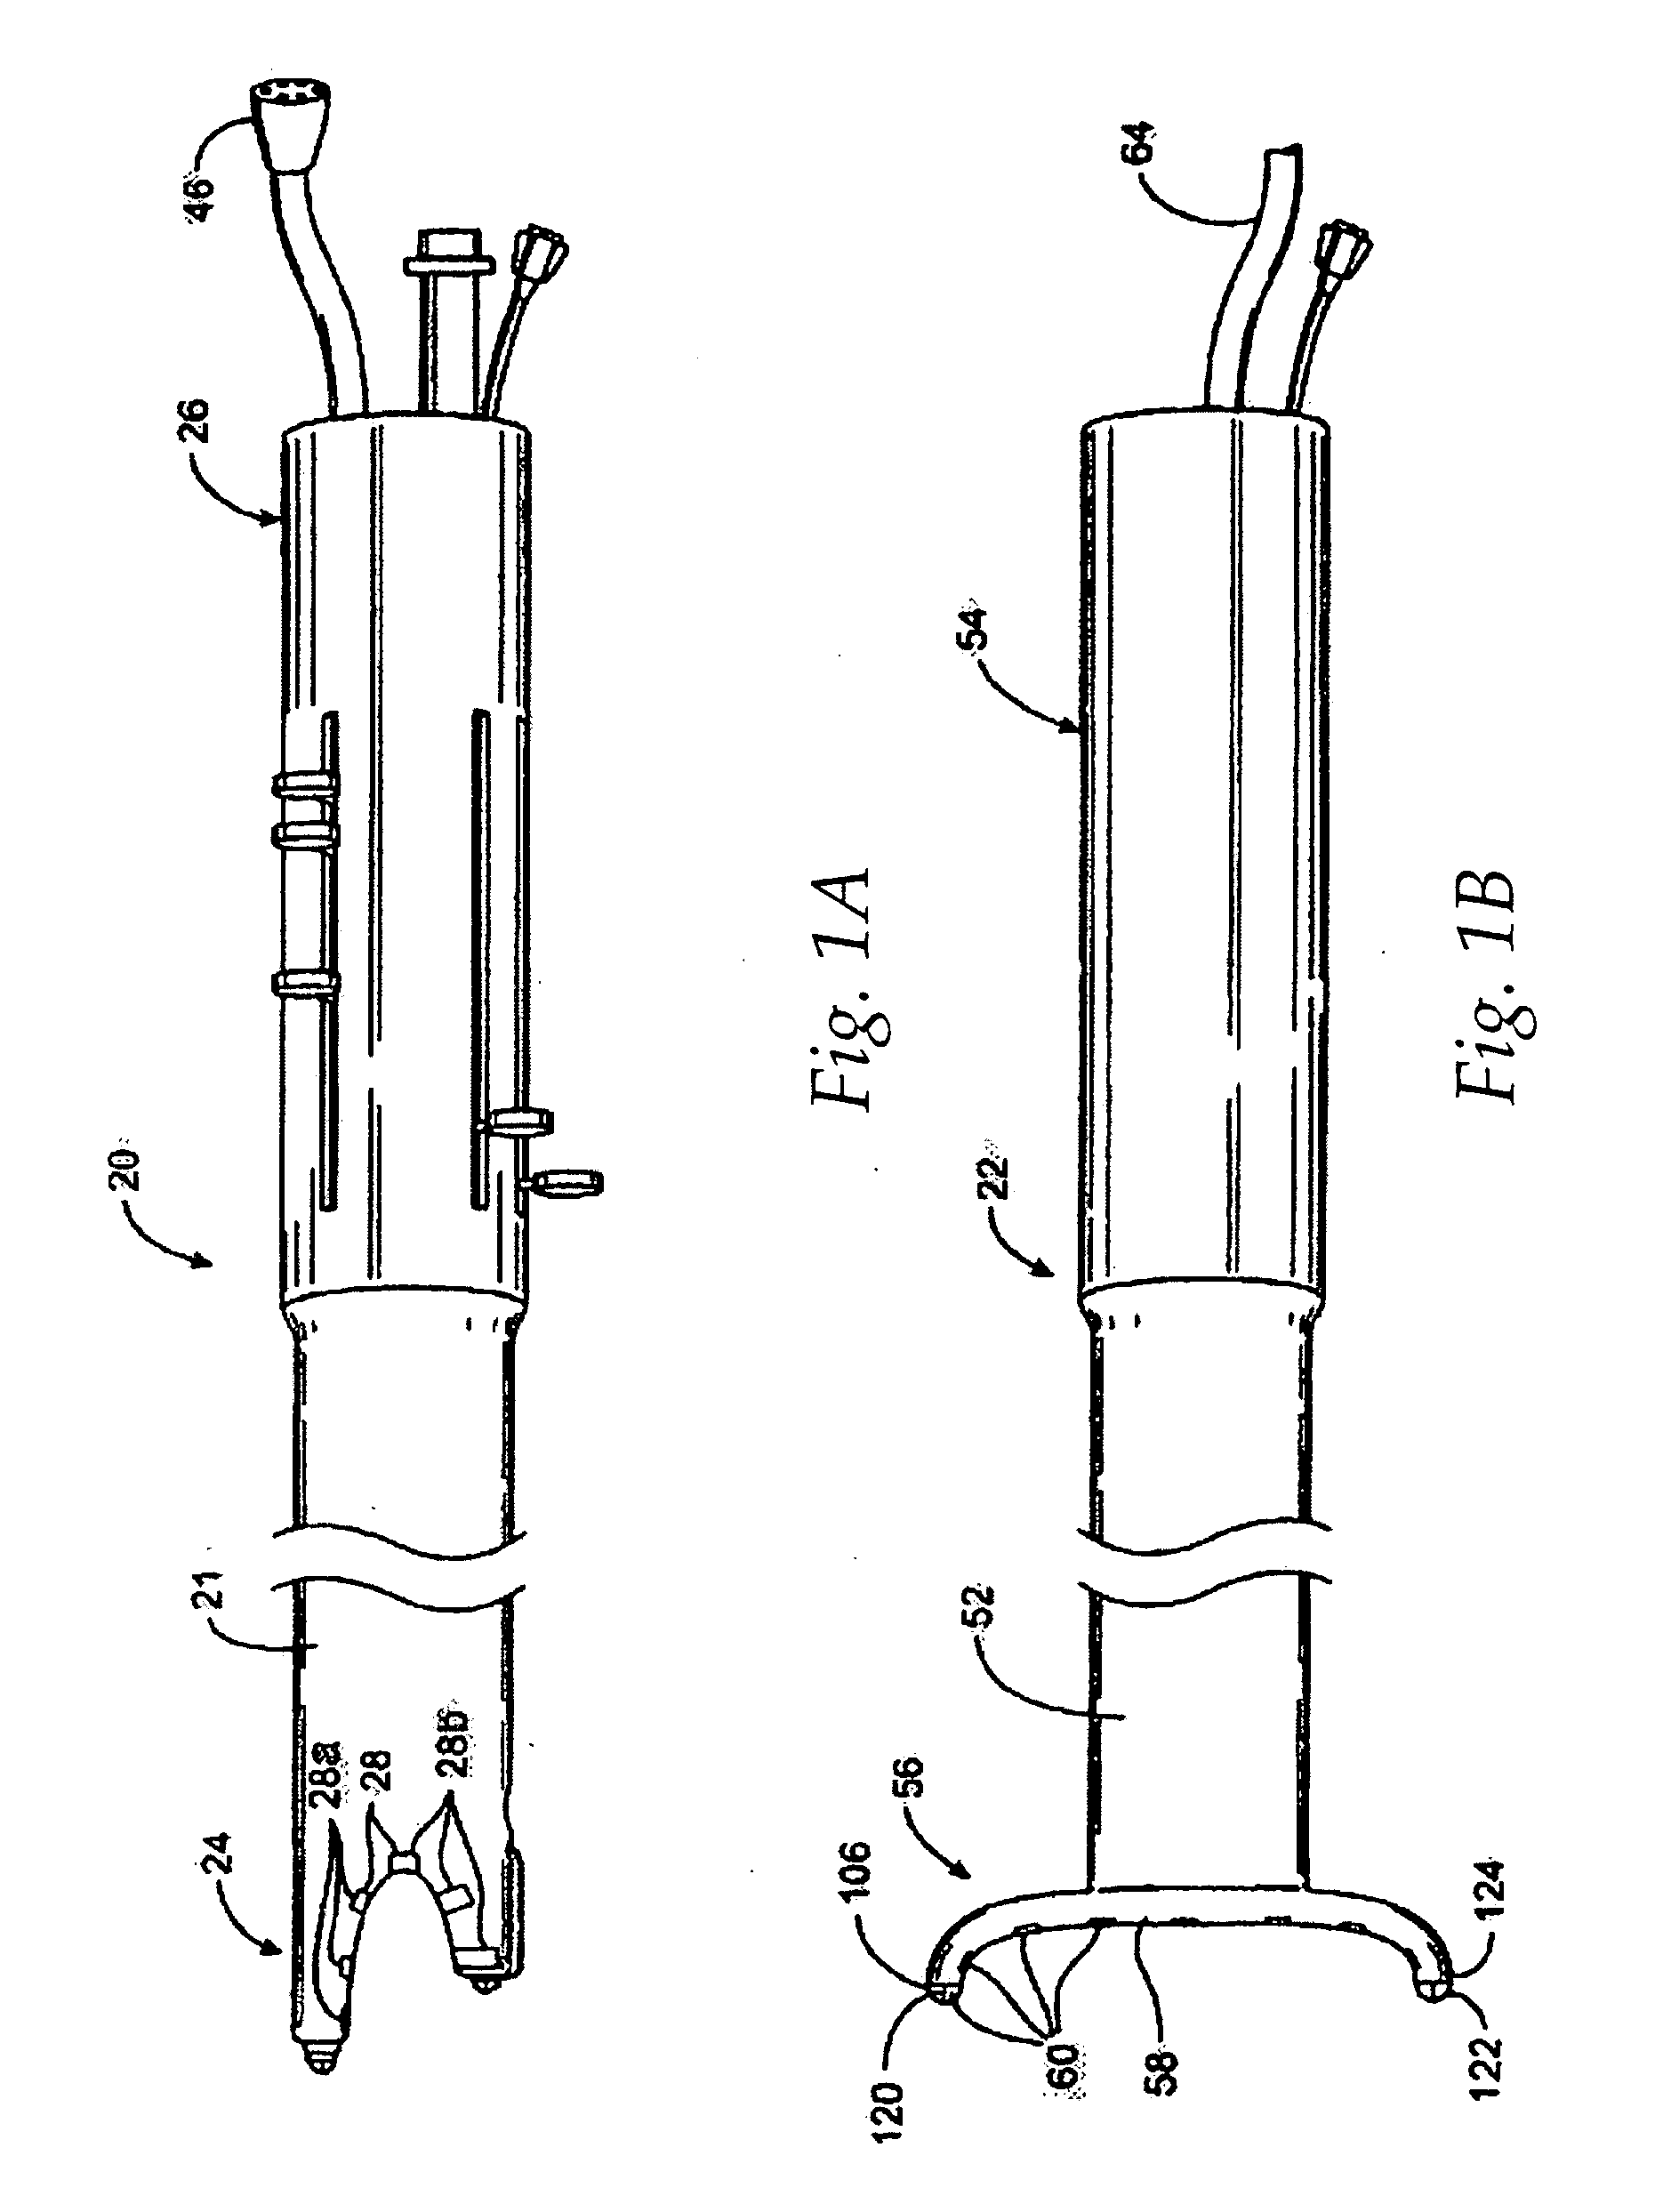 Switching methods and apparatus